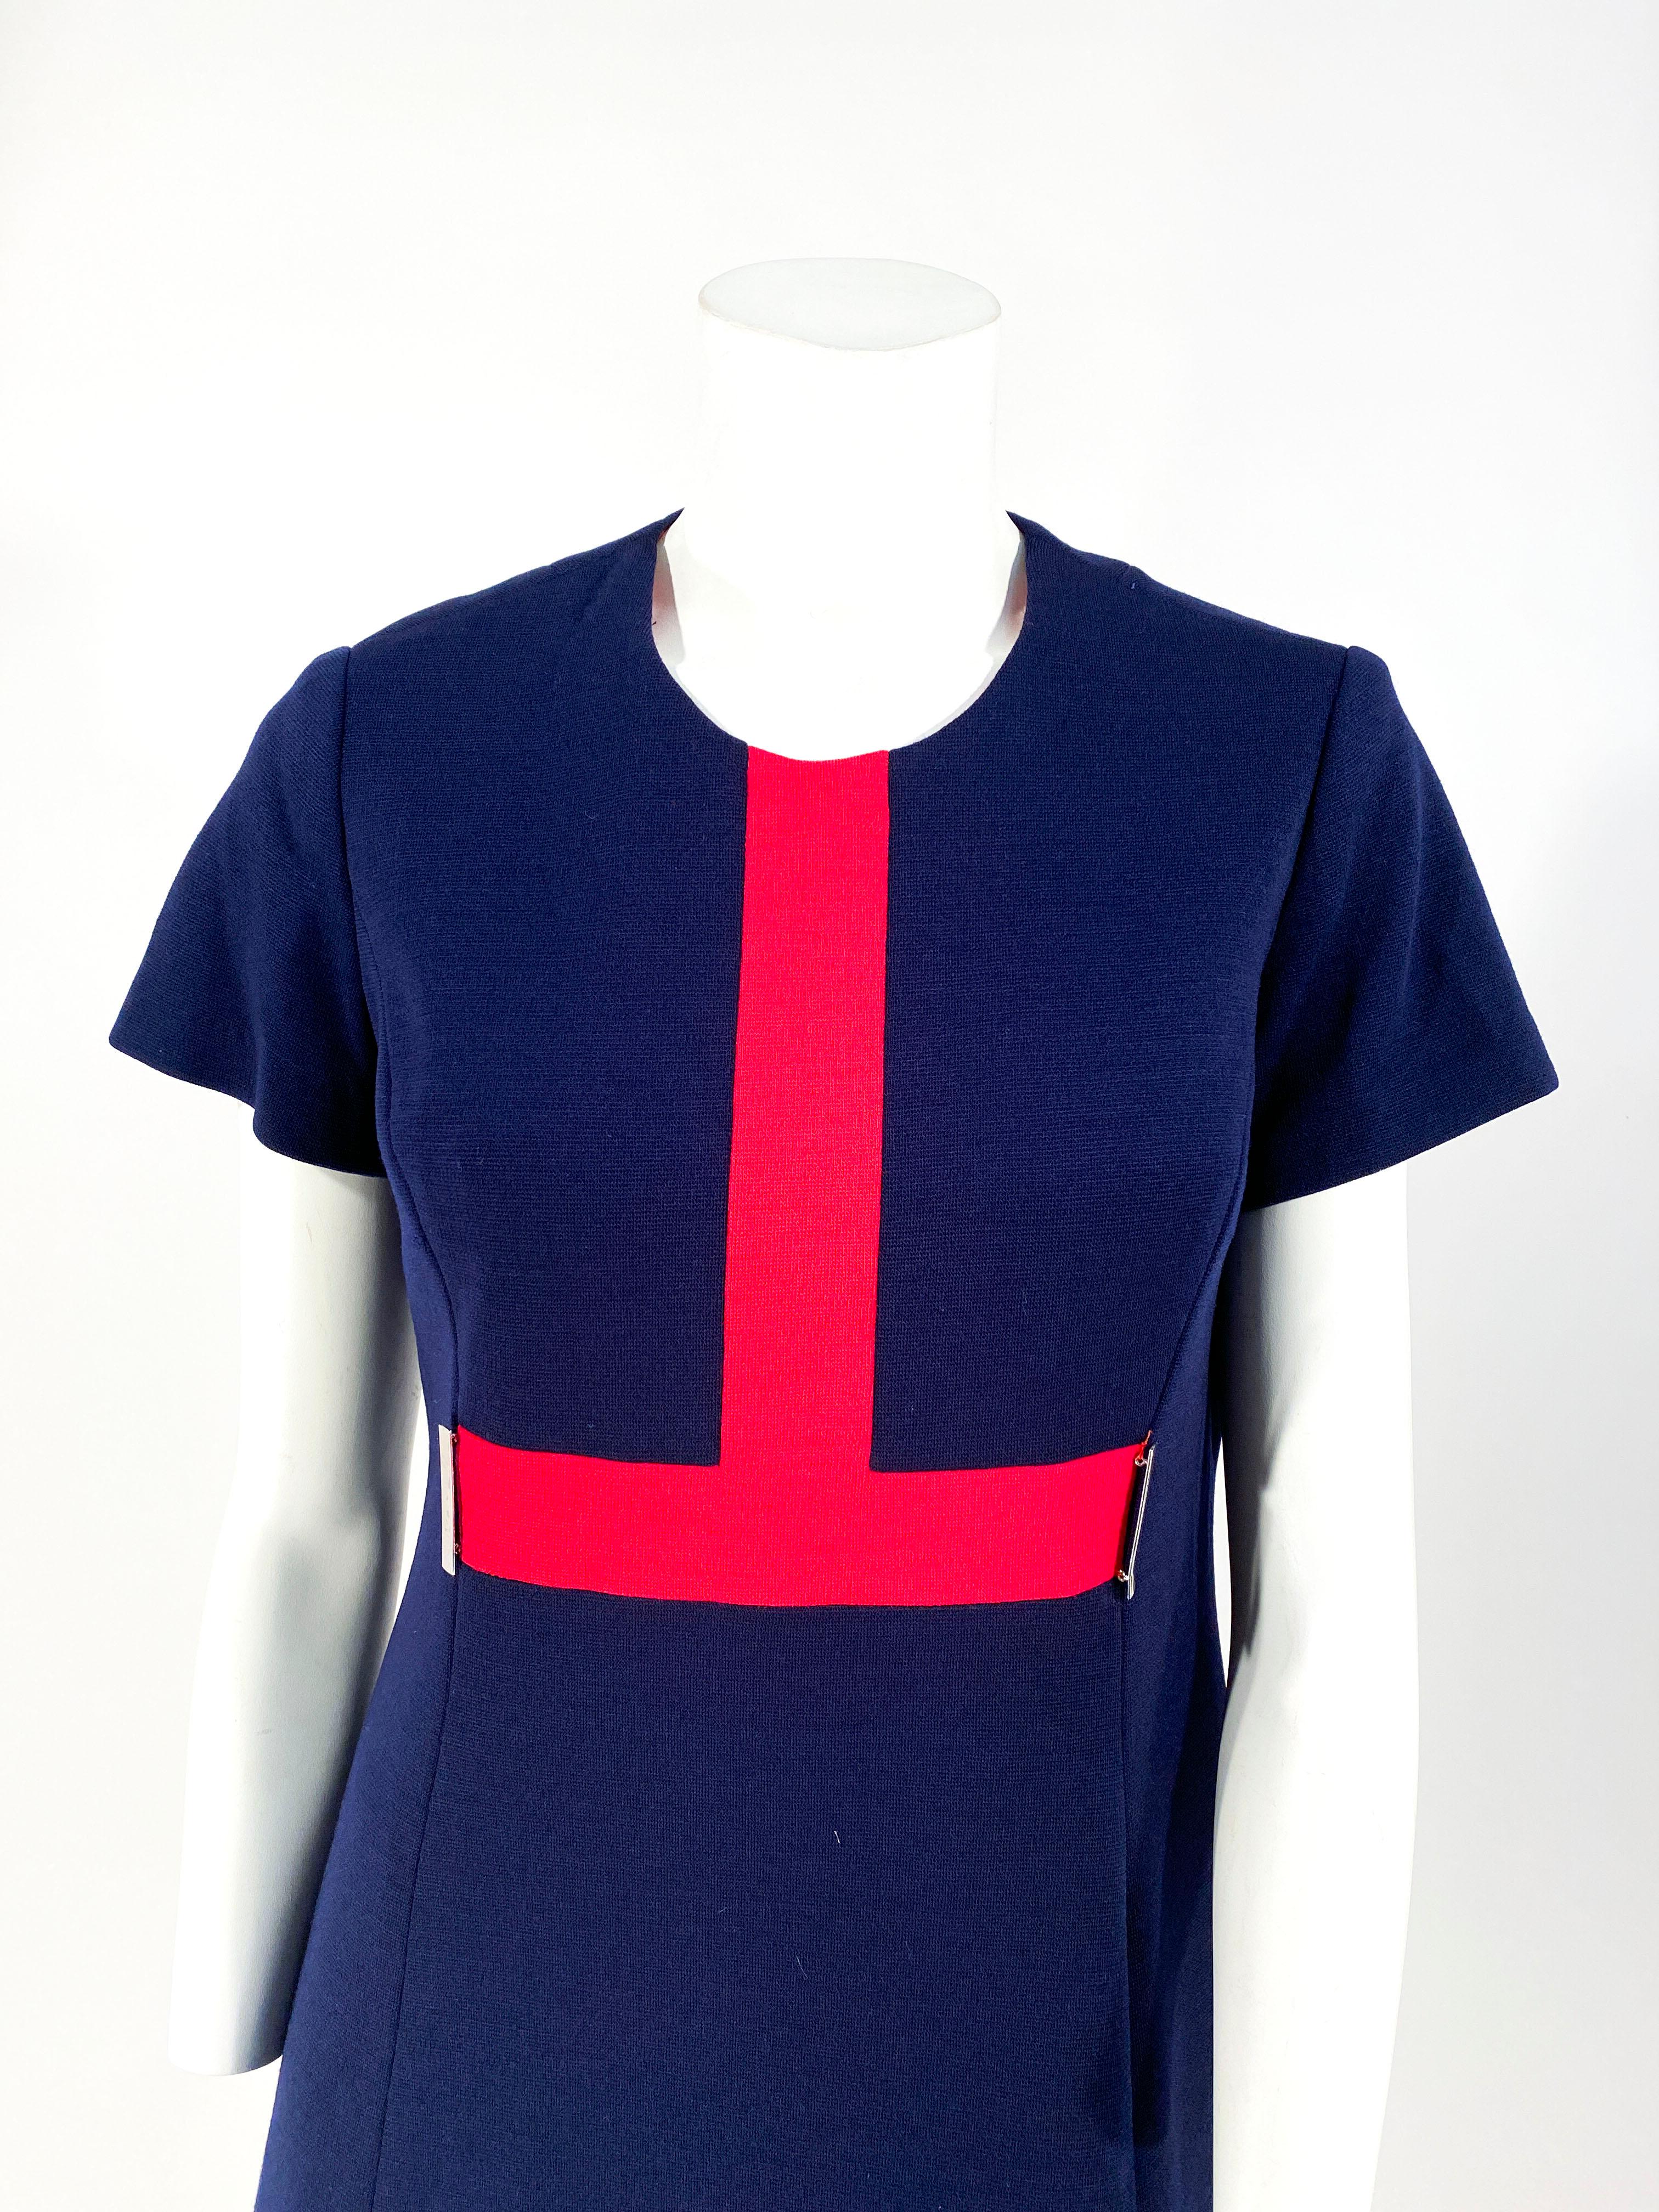 1960s navy blue knit wool mod a-line dress with  short sleeves, a bold red decorative in-set trim, round collar, and metal brass finishing. The back of the dress has a zipper closure and the interior is lined with red satin. 